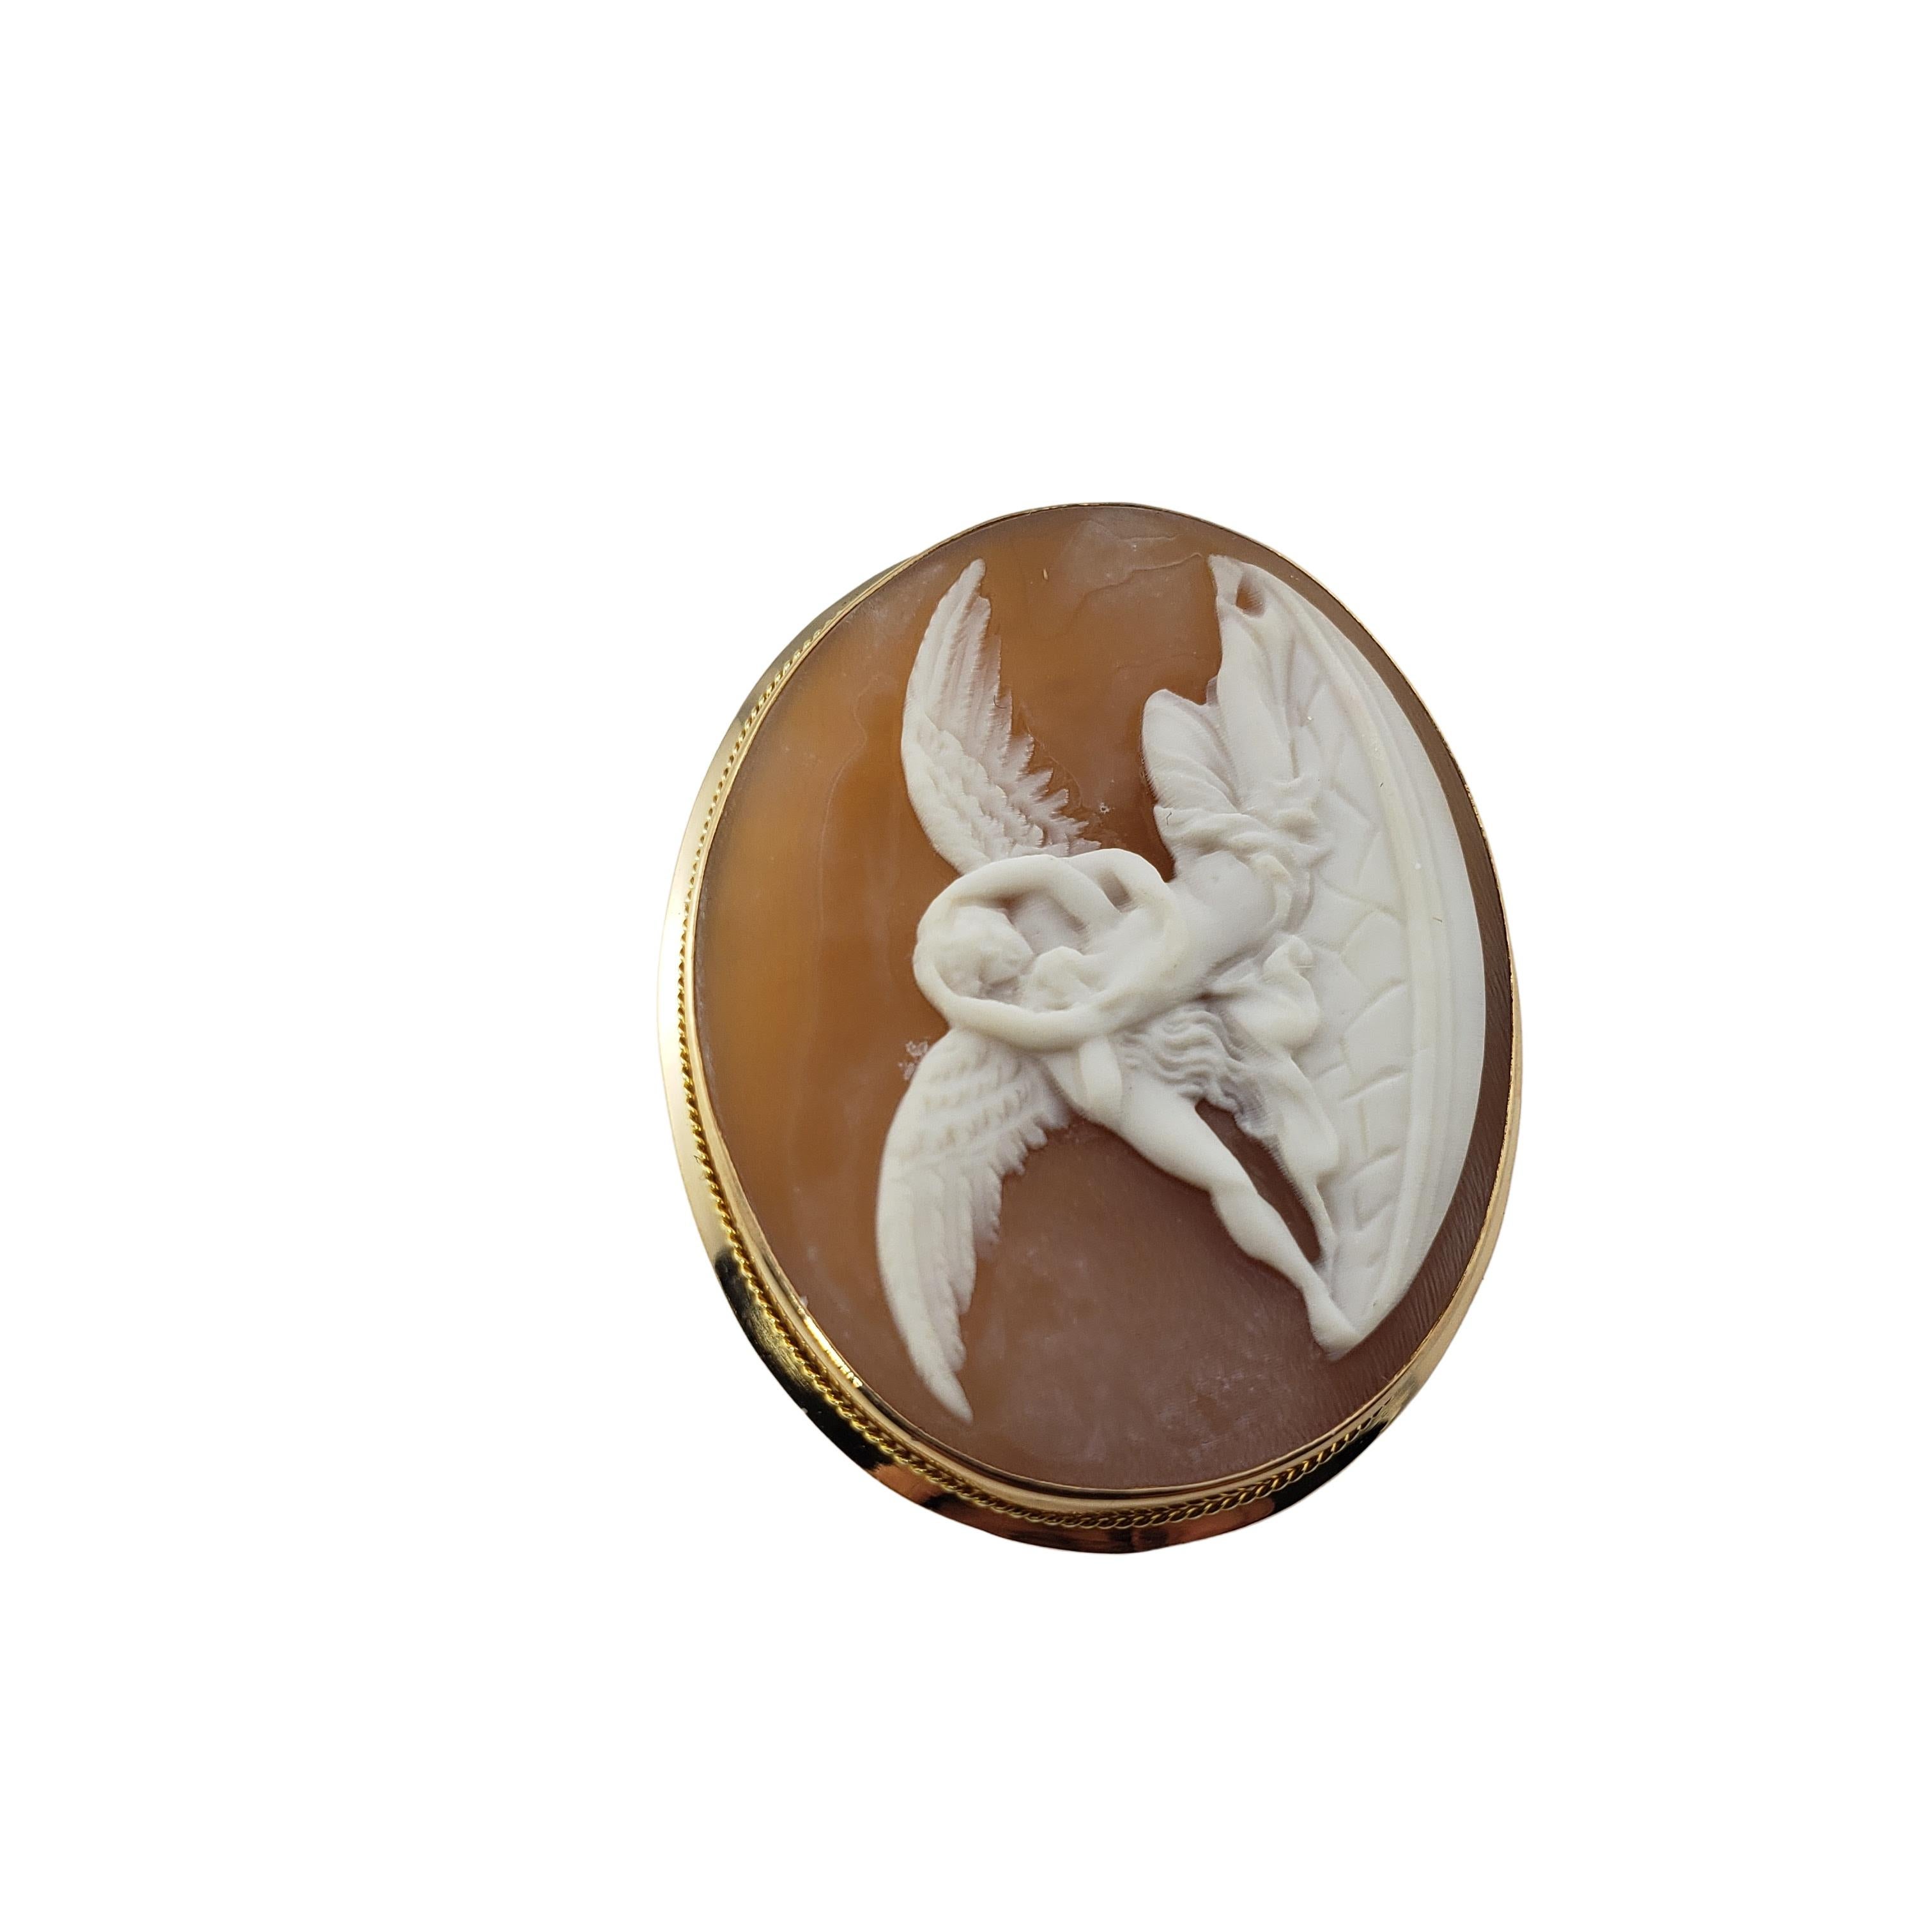 Vintage 18 Karat Yellow Gold Guardian Angel Cameo Brooch/Pin-

This stunning cameo brooch features a figure embracing their guardian angel.  Set in classic 18K yellow gold.

Size:  37 mm x  29 mm

Weight:  3.5 dwt. /  5.5 gr.

Hallmark:  18K

Very